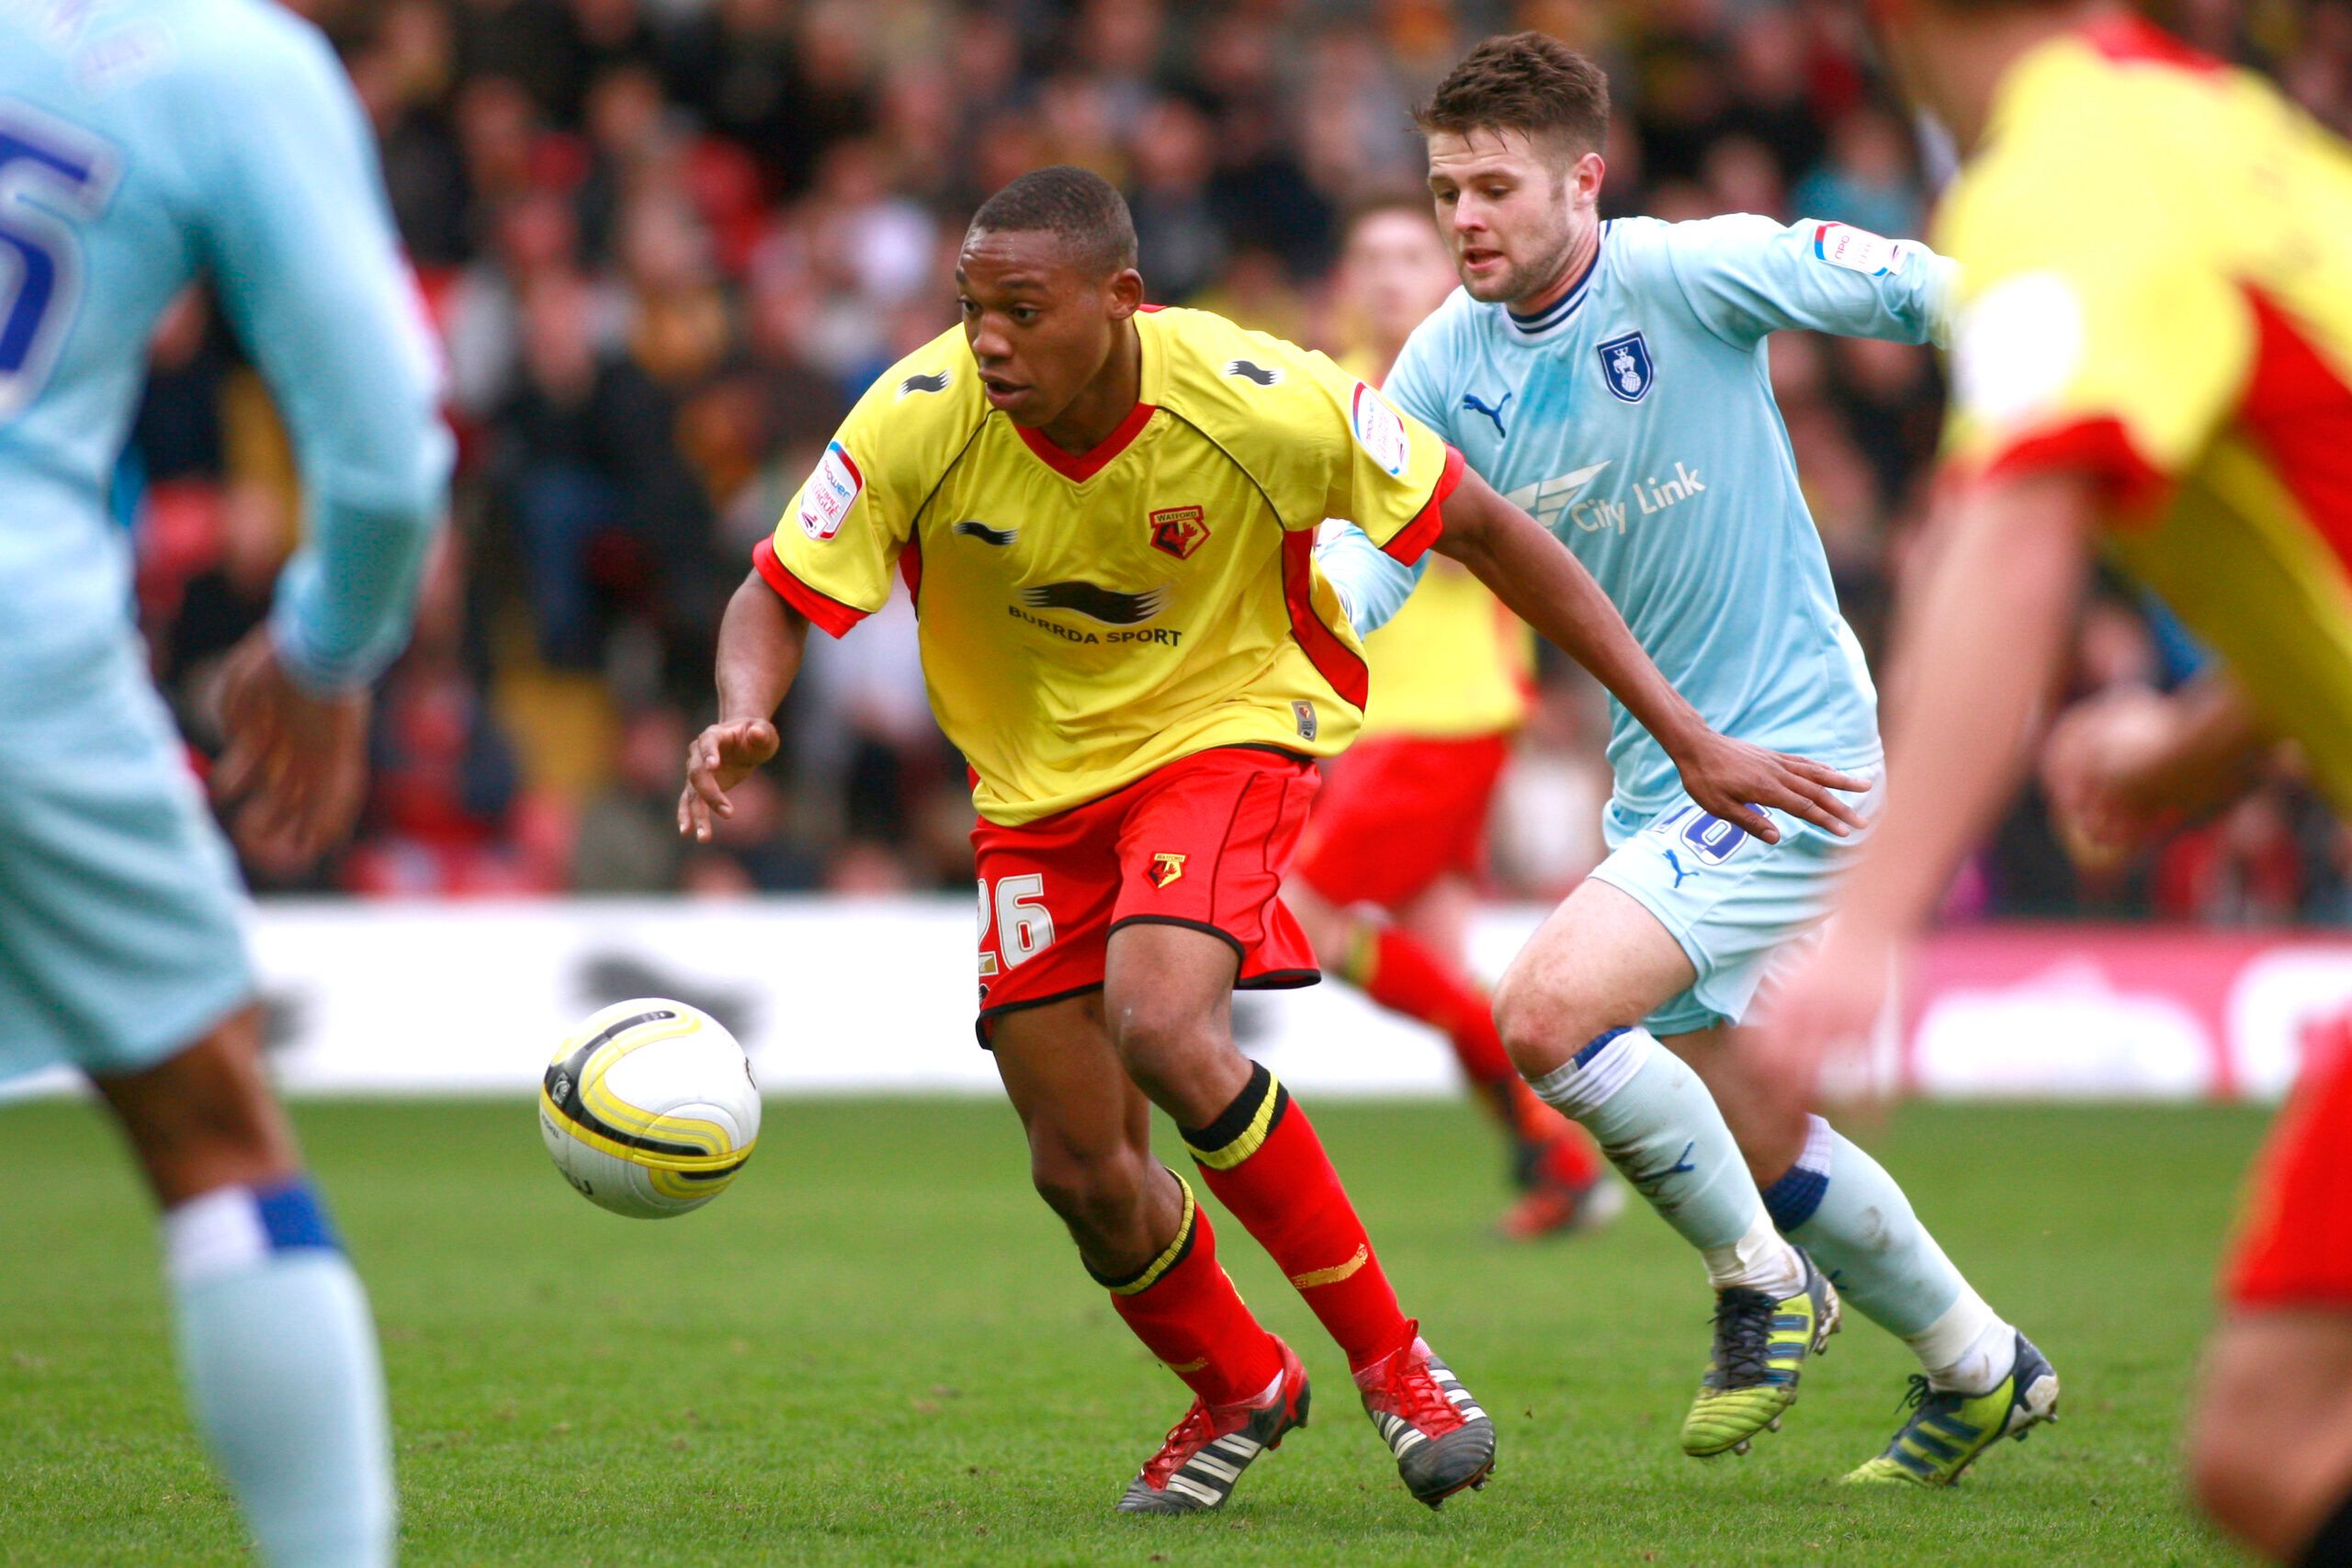 Football - Watford v Coventry City npower Football League Championship  - Vicarage Road - 11/12 , 17/3/12 
Britt Assombalonga - Watford in action against Oliver Norwood - Coventry City 
Mandatory Credit: Action Images / Lee Mills 
EDITORIAL USE ONLY. No use with unauthorized audio, video, data, fixture lists, club/league logos or live services. Online in-match use limited to 45 images, no video emulation. No use in betting, games or single club/league/player publications.  Please contact your ac